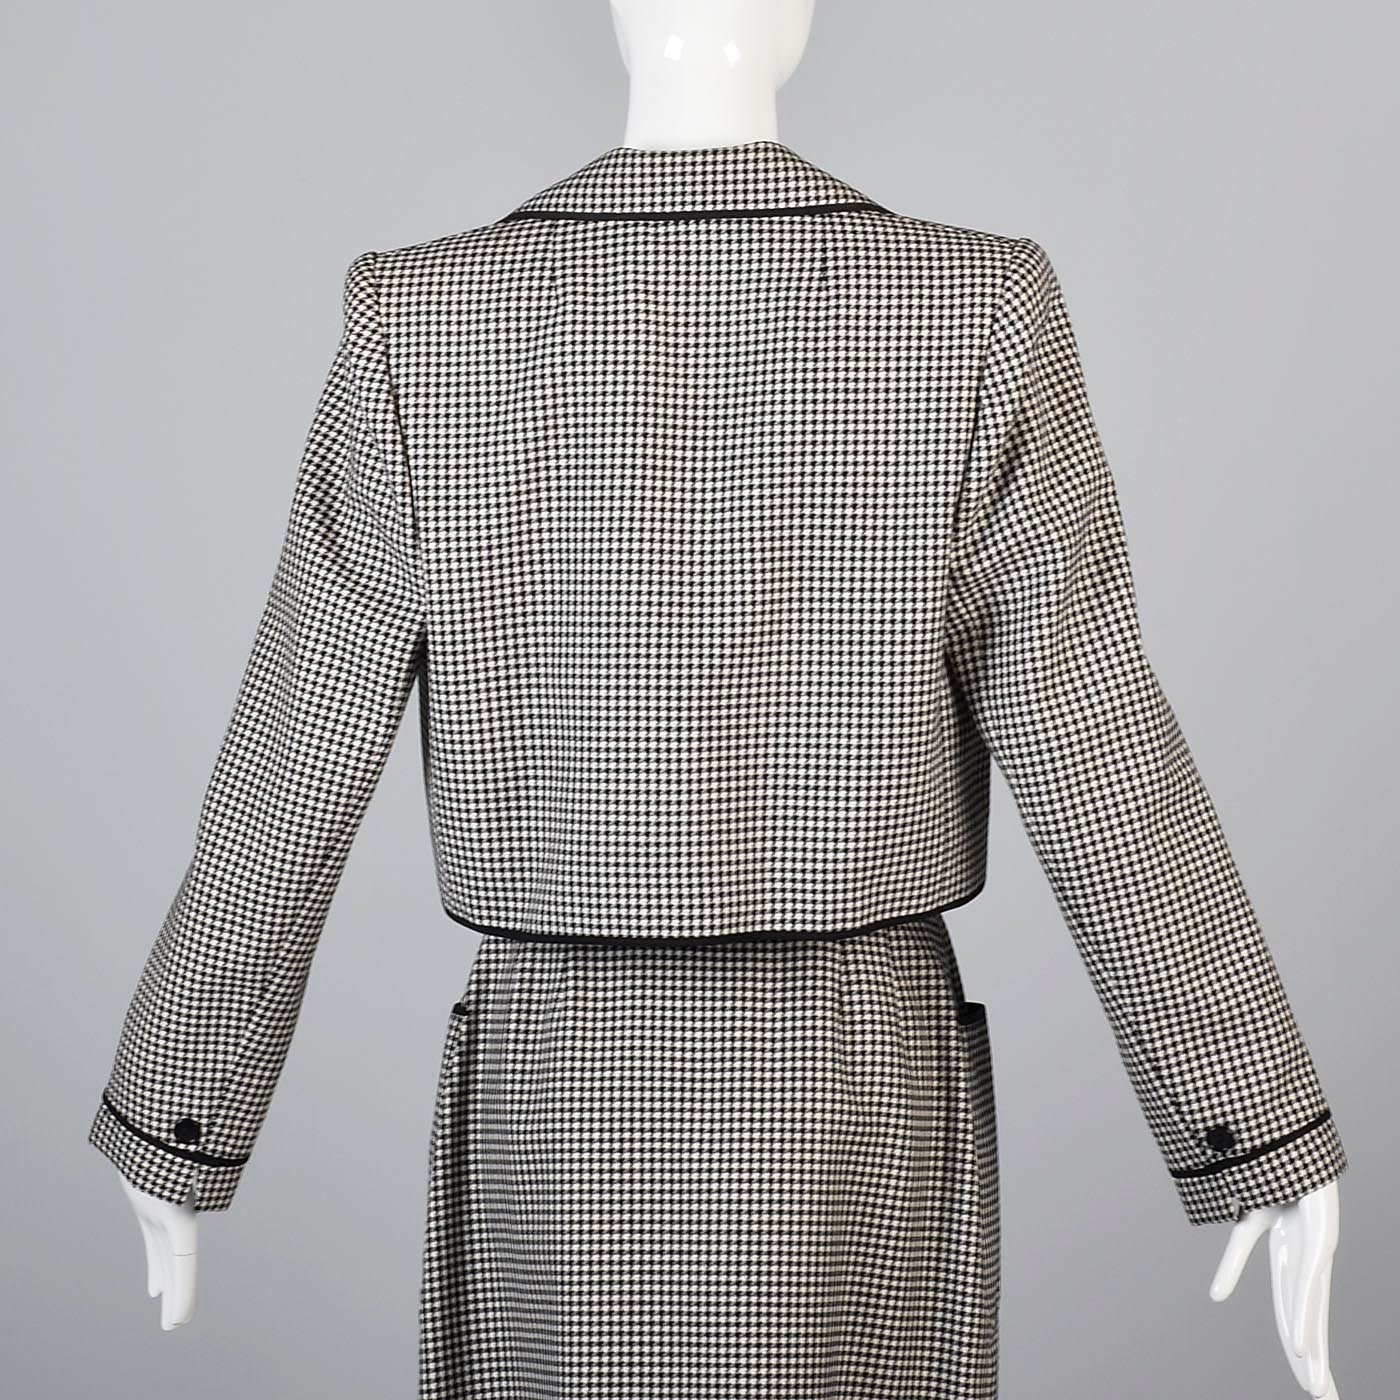 1970s Nina Ricci Wool Skirt Suit in Houndstooth Check